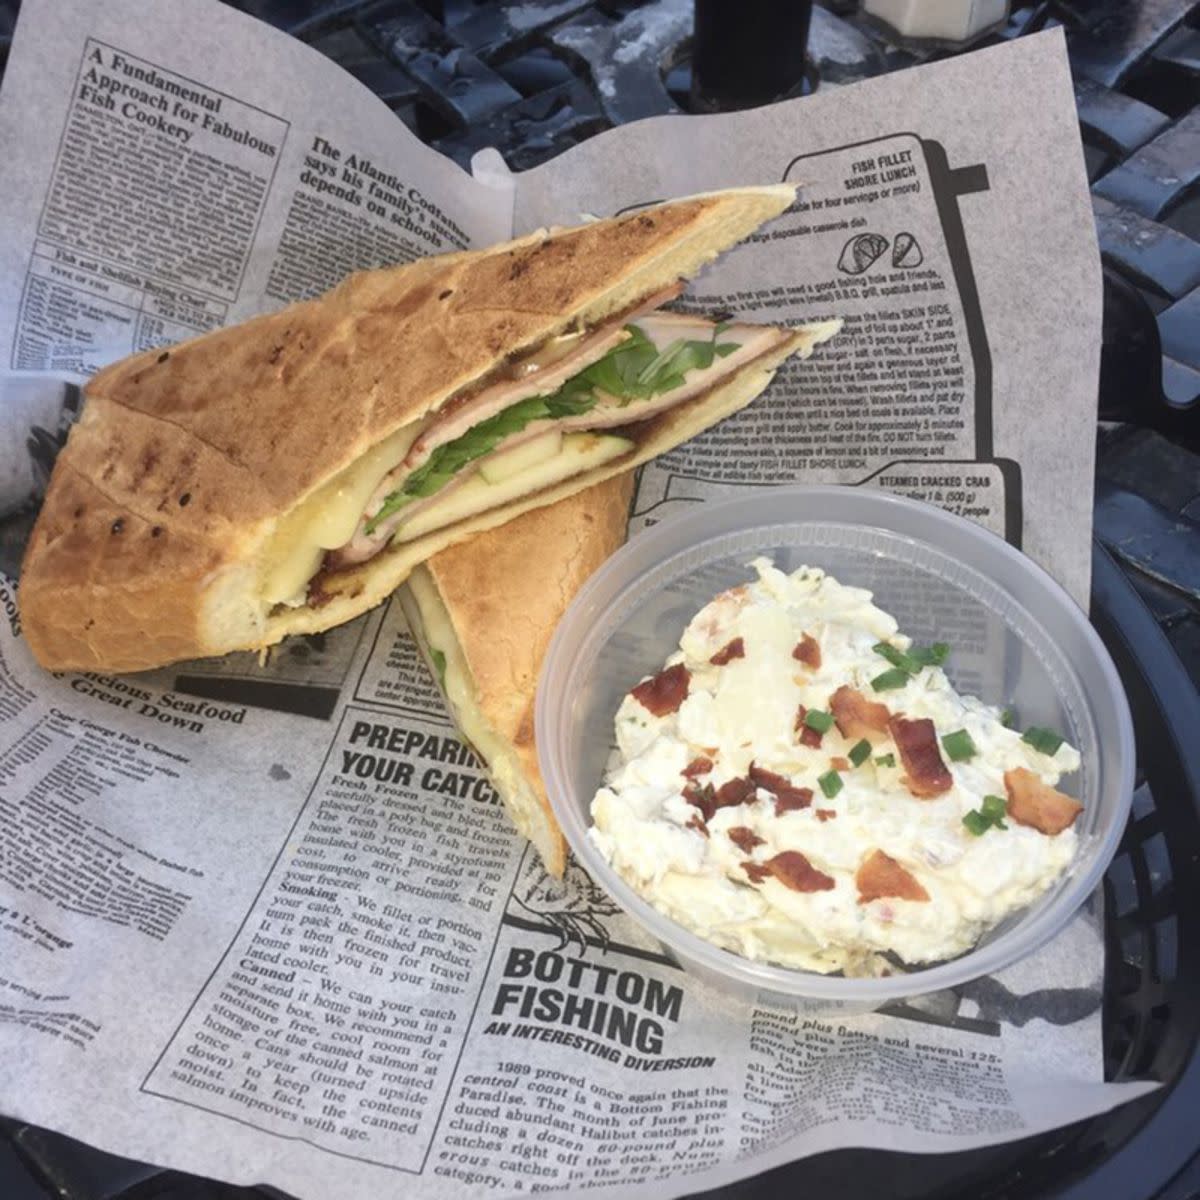 Apple 'Butter' Jeans Sandwich with a side of egg salad on a newspaper like white serving paper, Brown Dog Deli, Charleston, South Carolina, on a black plastic basket outside on a black wire table